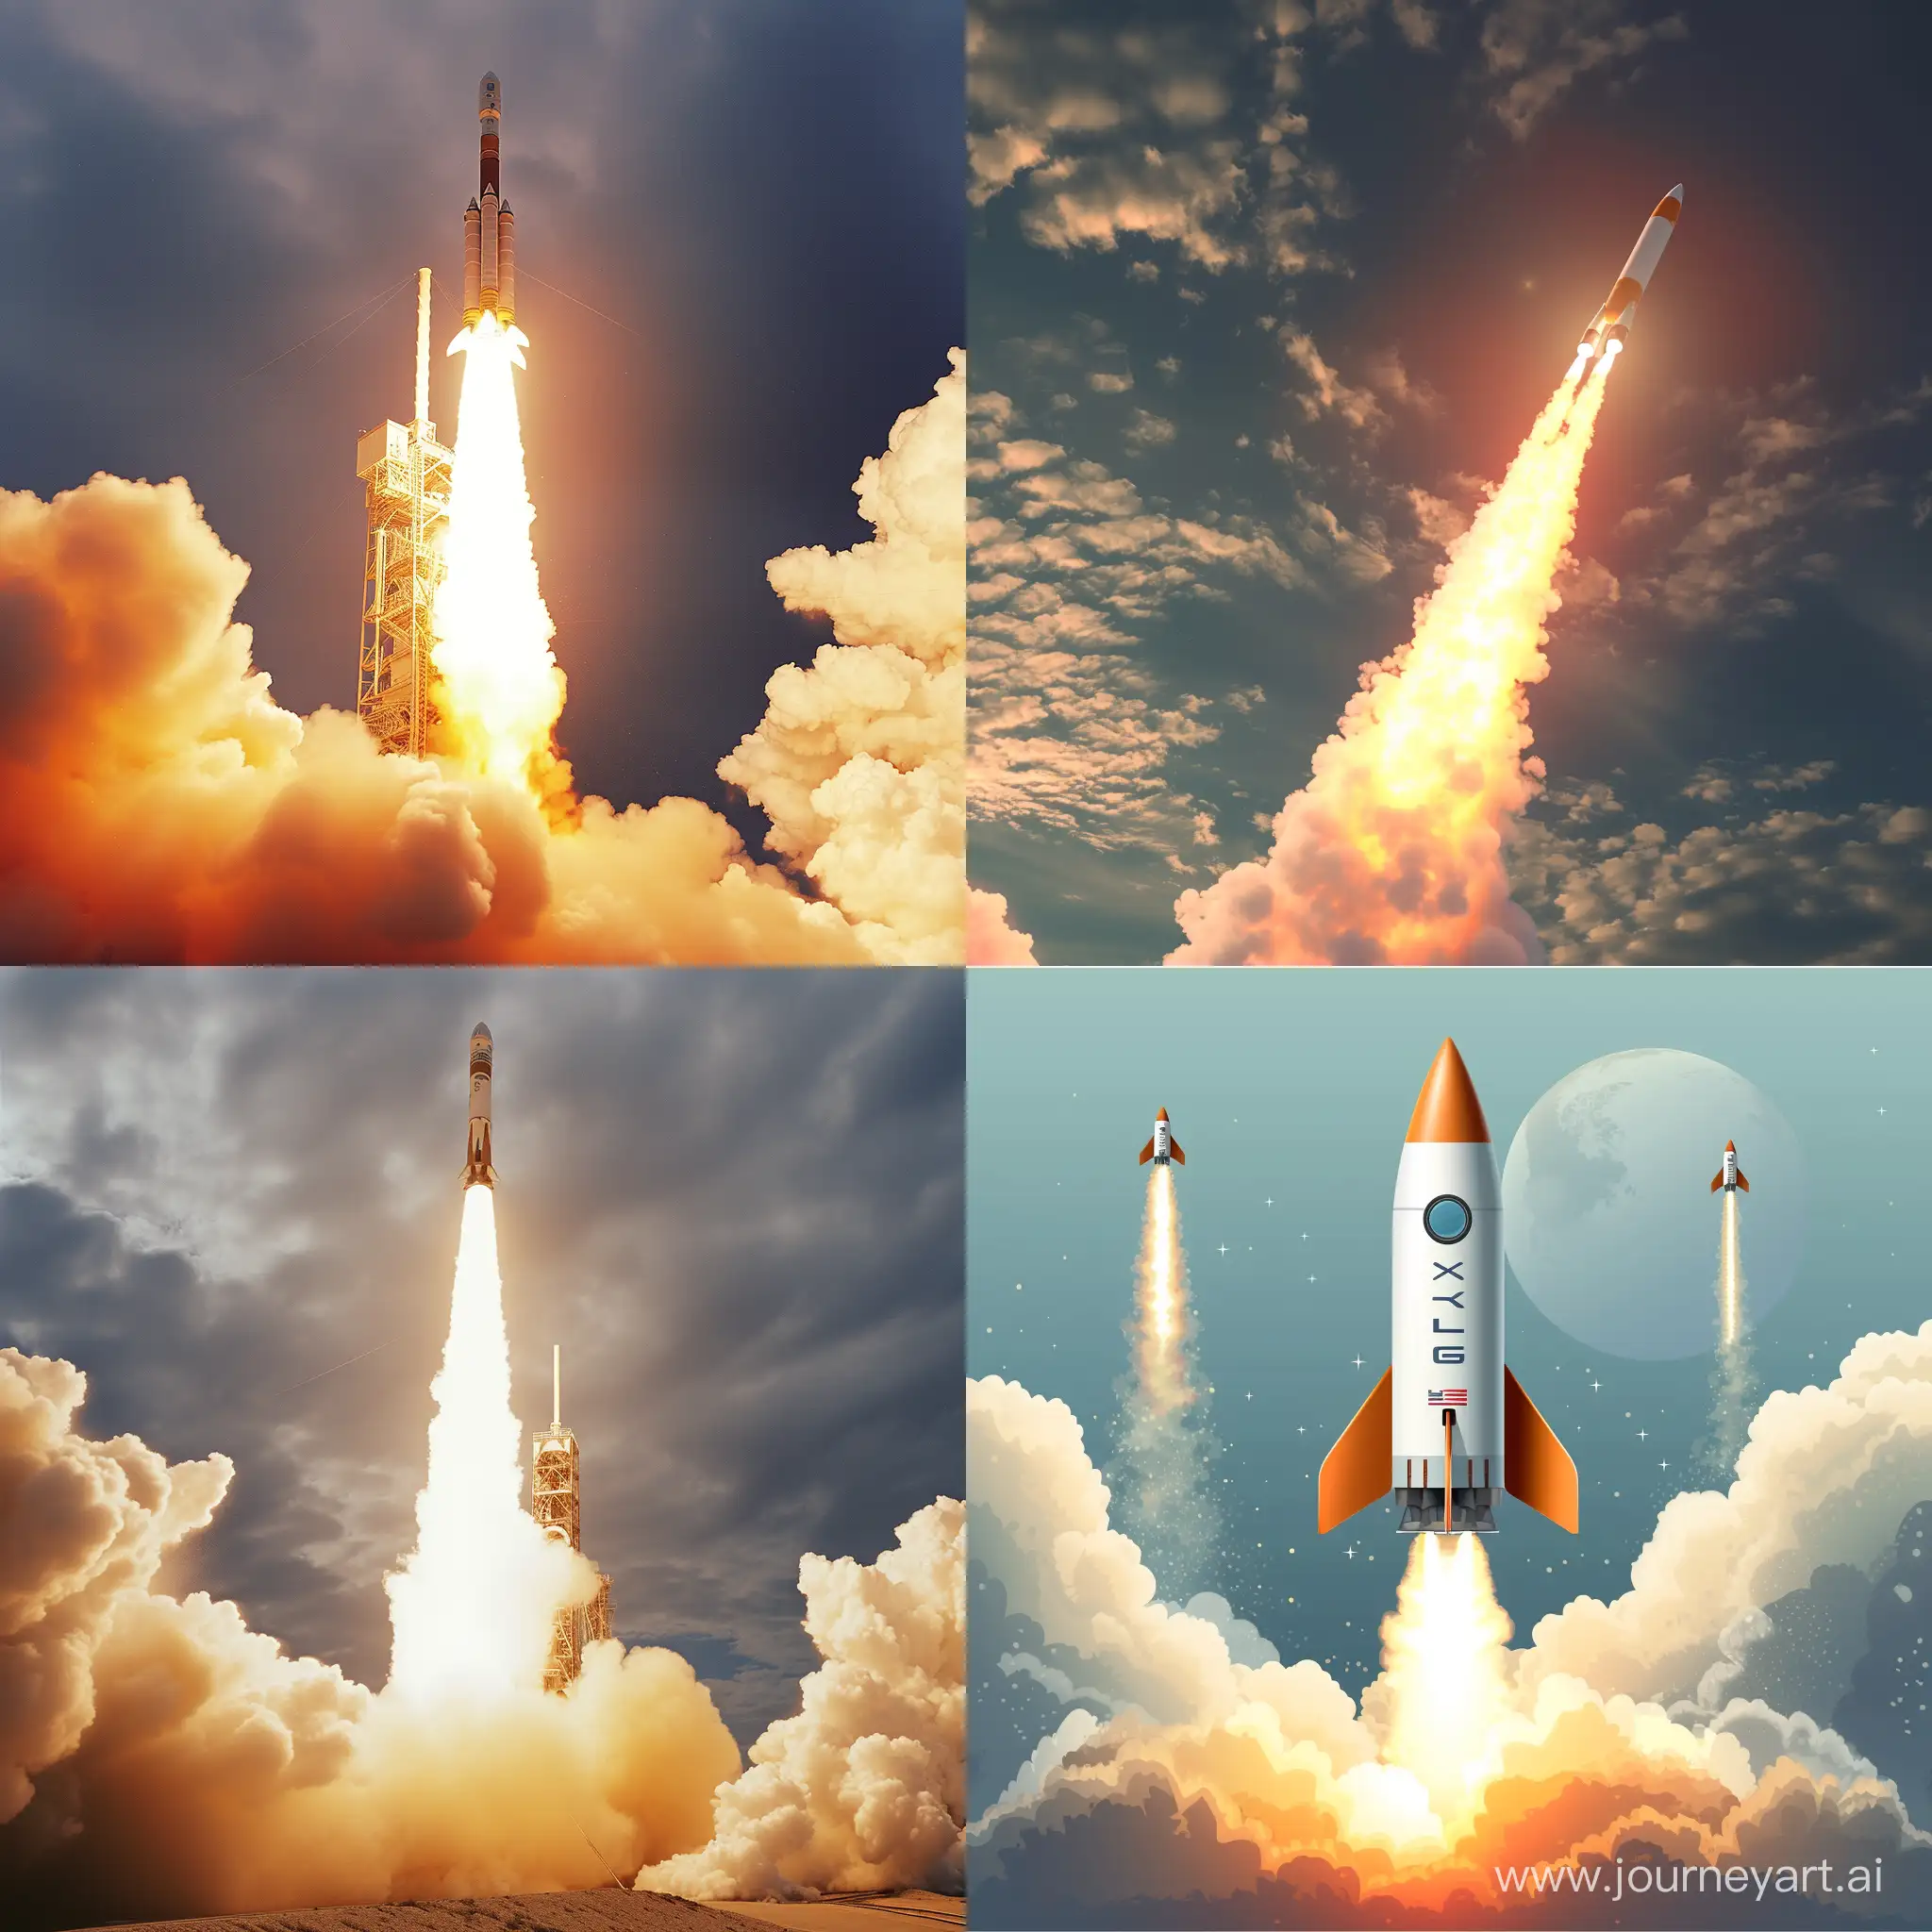 Vibrant-Rocket-Launching-Scene-with-Dramatic-Sky